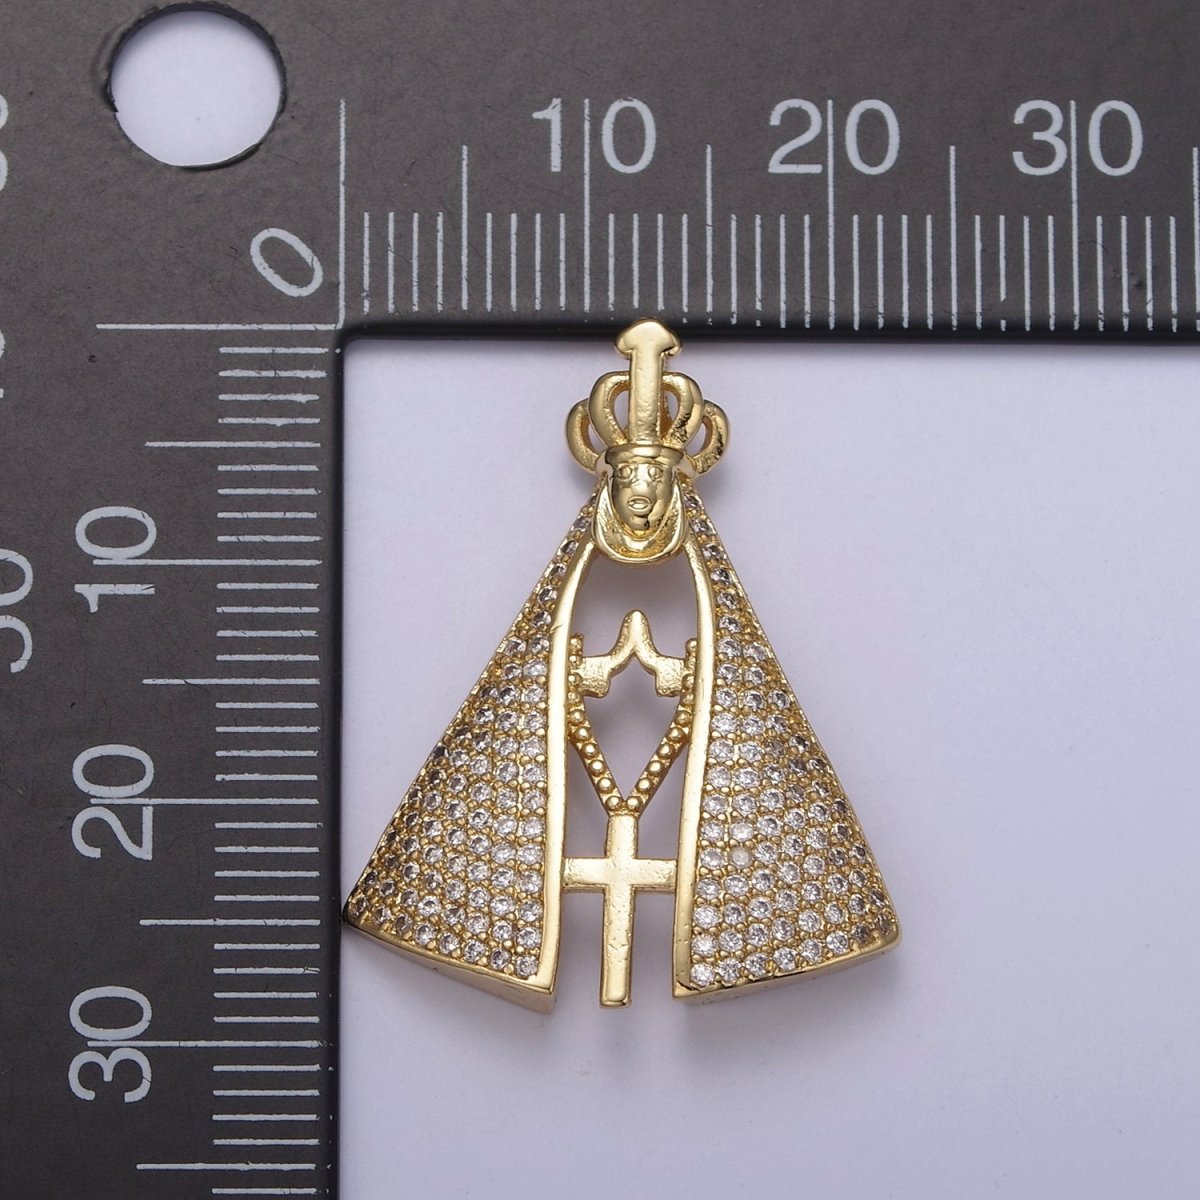 24K Gold Filled Cape Pendant for Pastor Catholic Religious Jewelry Making Supply N-538 - DLUXCA